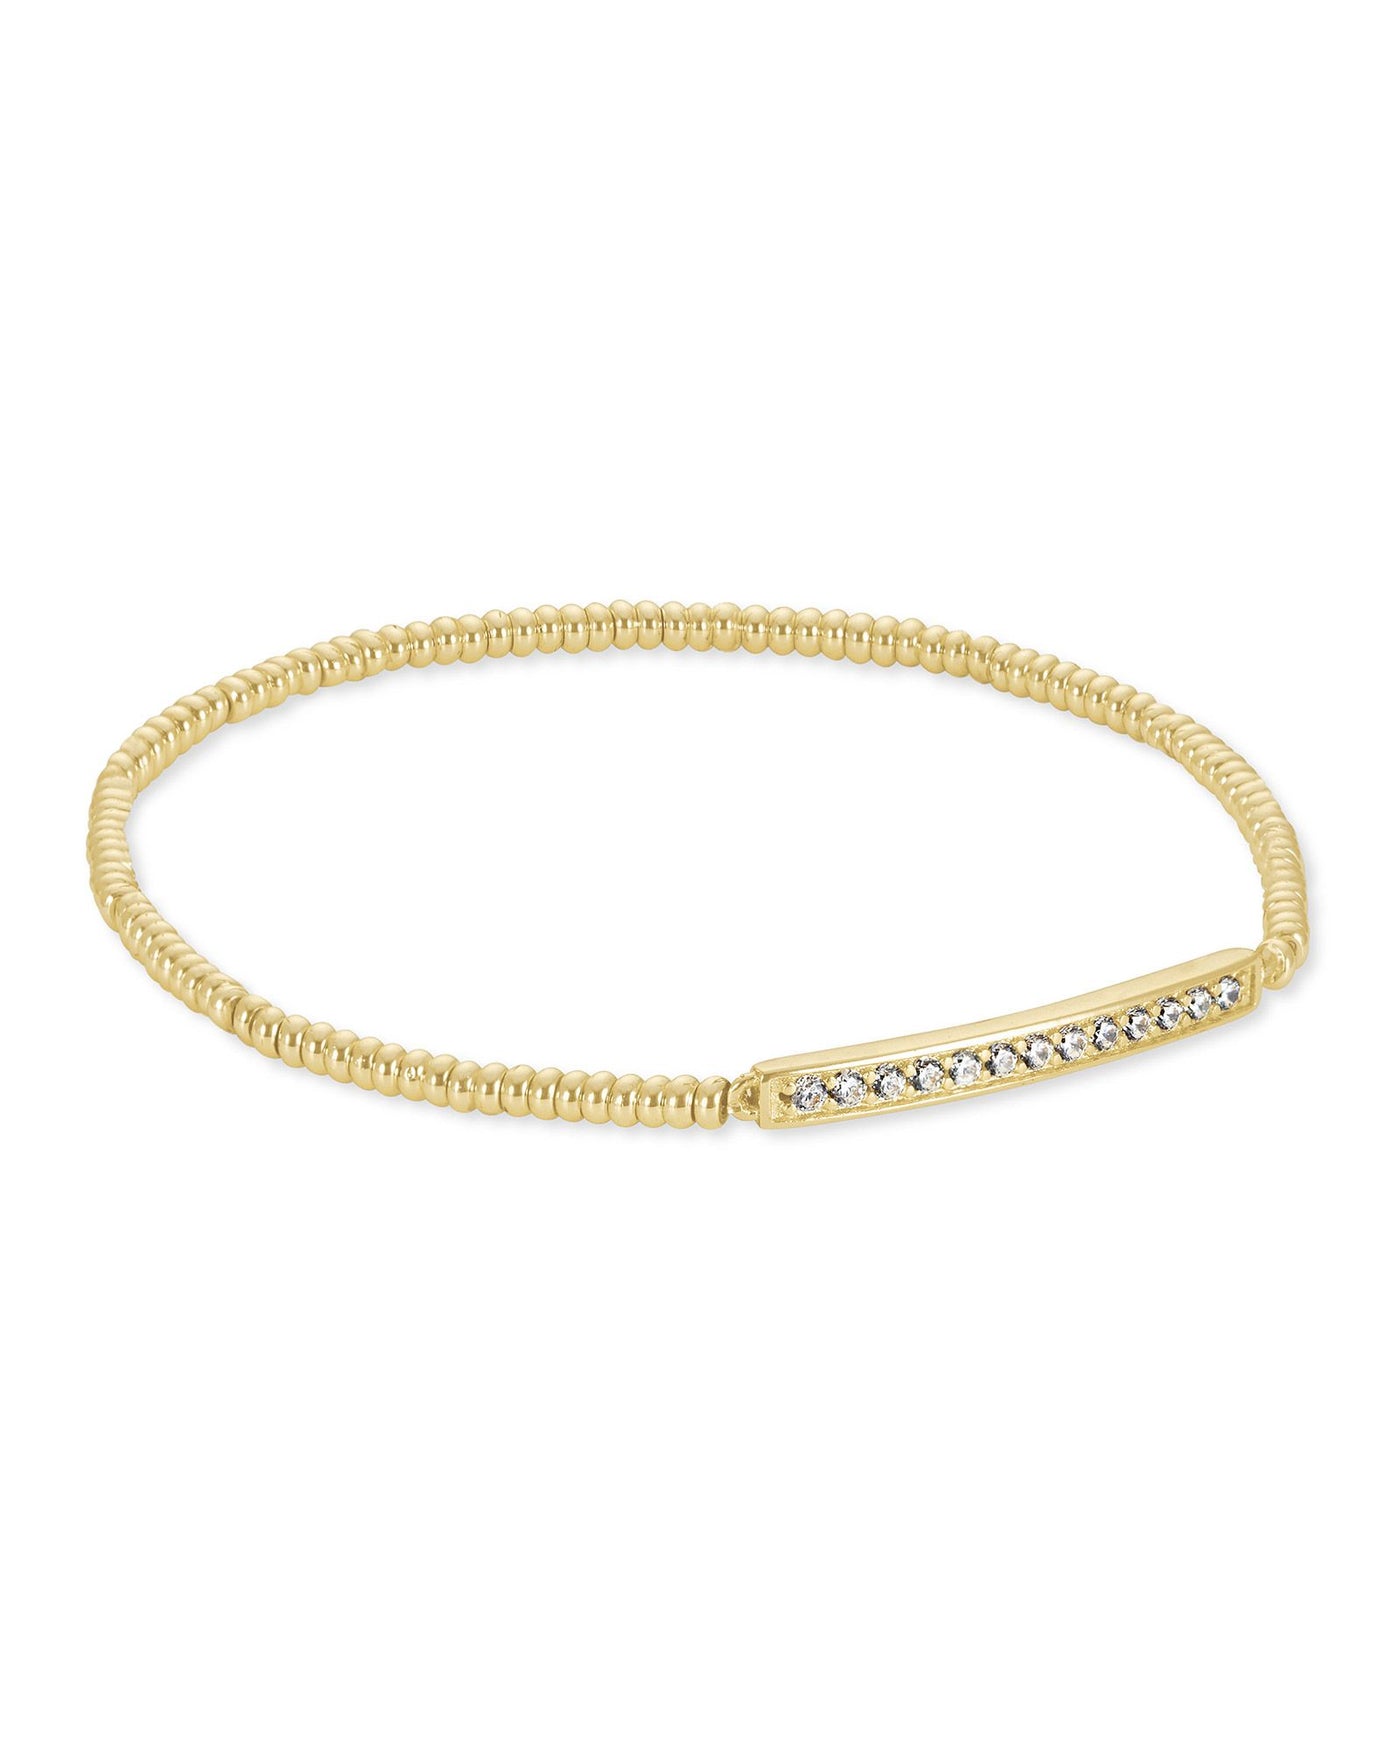 Kendra Scott Addison Stretch Bracelet - Gold-Bracelets-Kendra Scott-Market Street Nest, Fashionable Clothing, Shoes and Home Décor Located in Mabank, TX